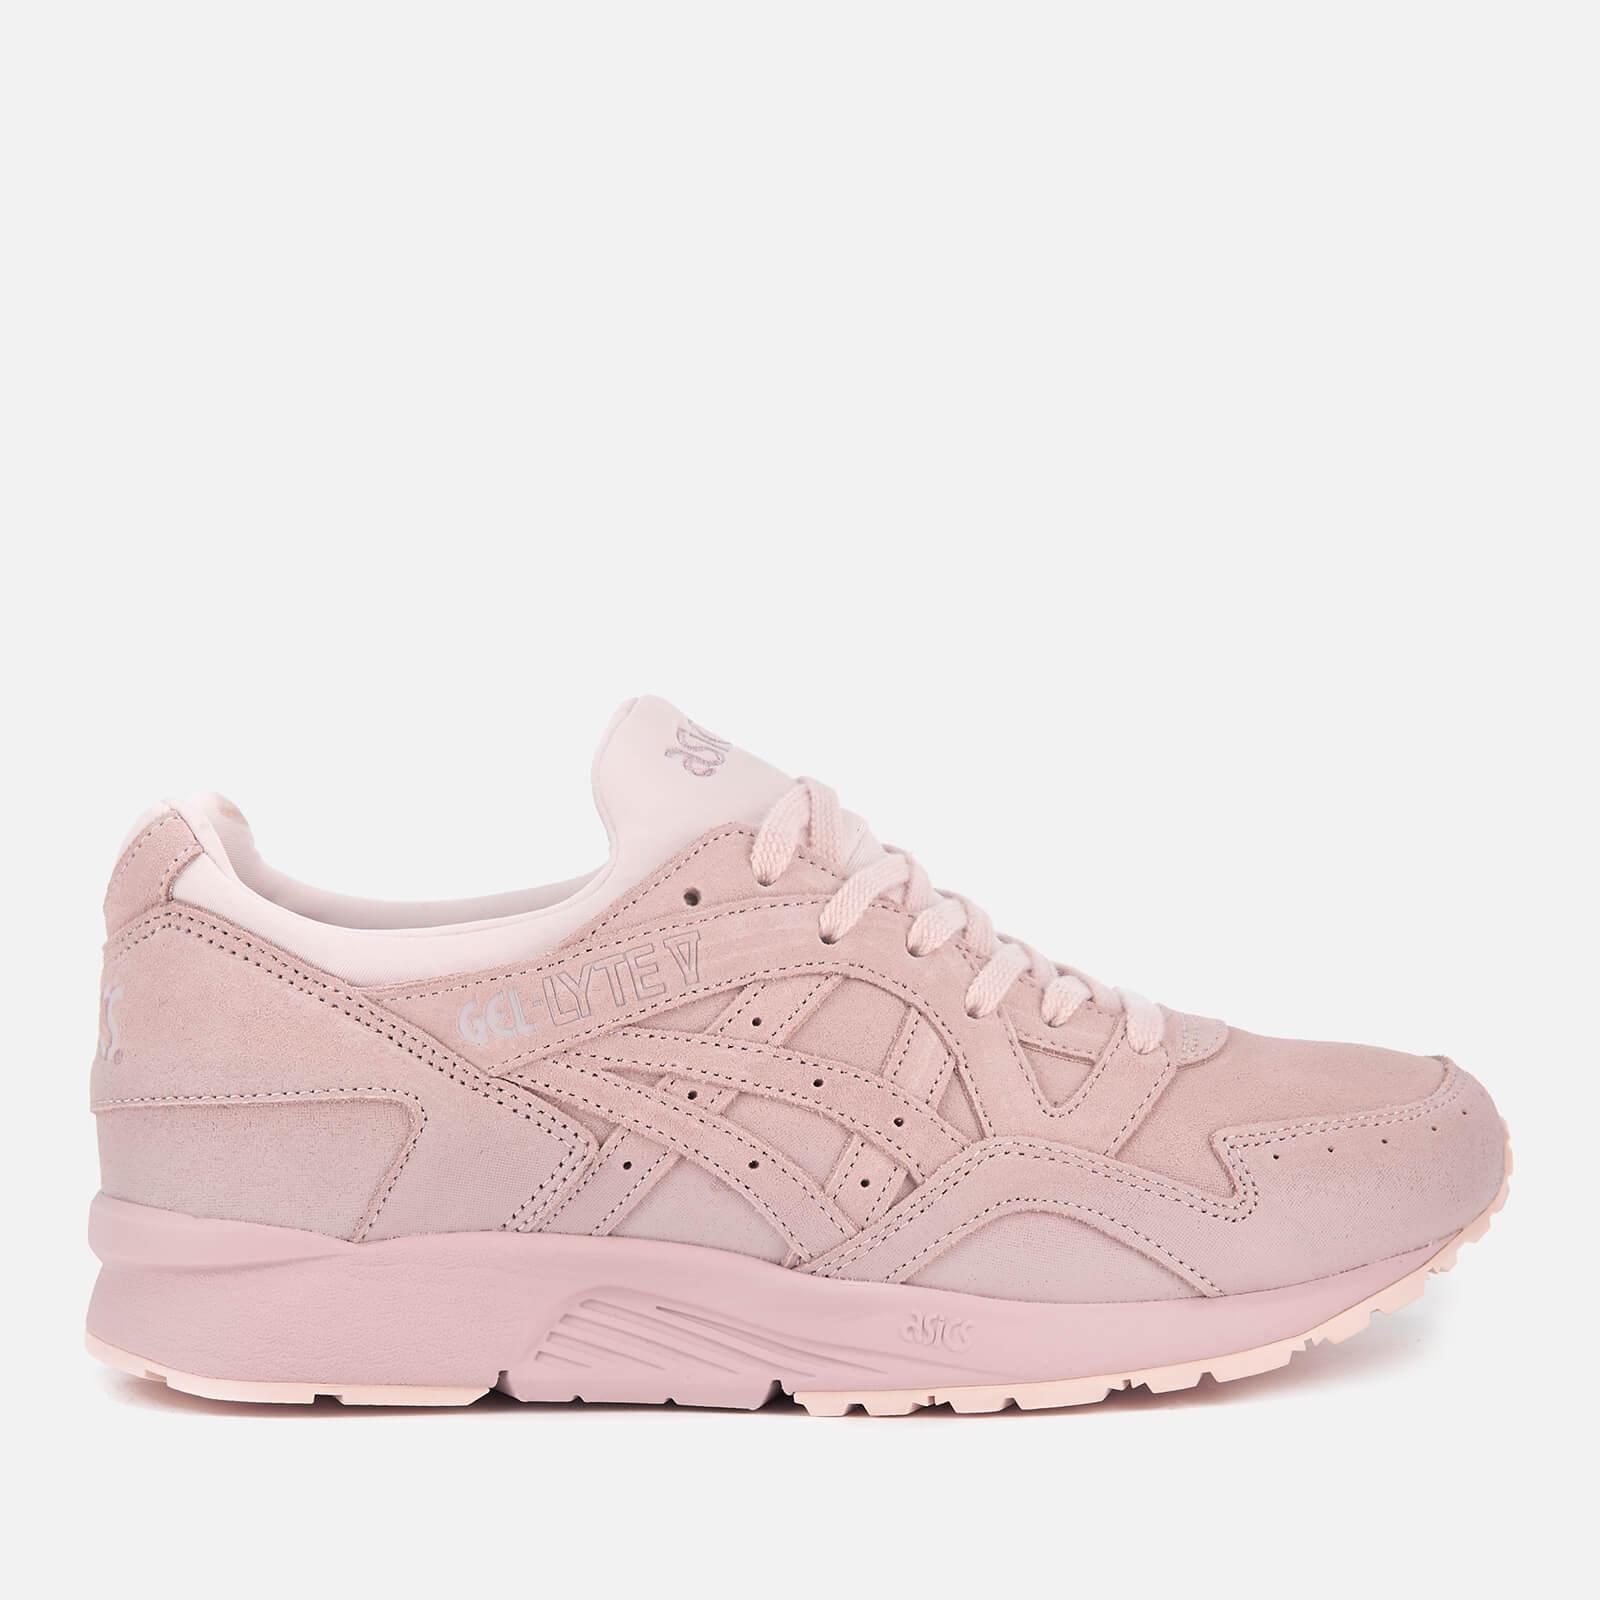 Asics Gel-lyte V Suede Trainers in Cream/Pink (Pink) - Lyst